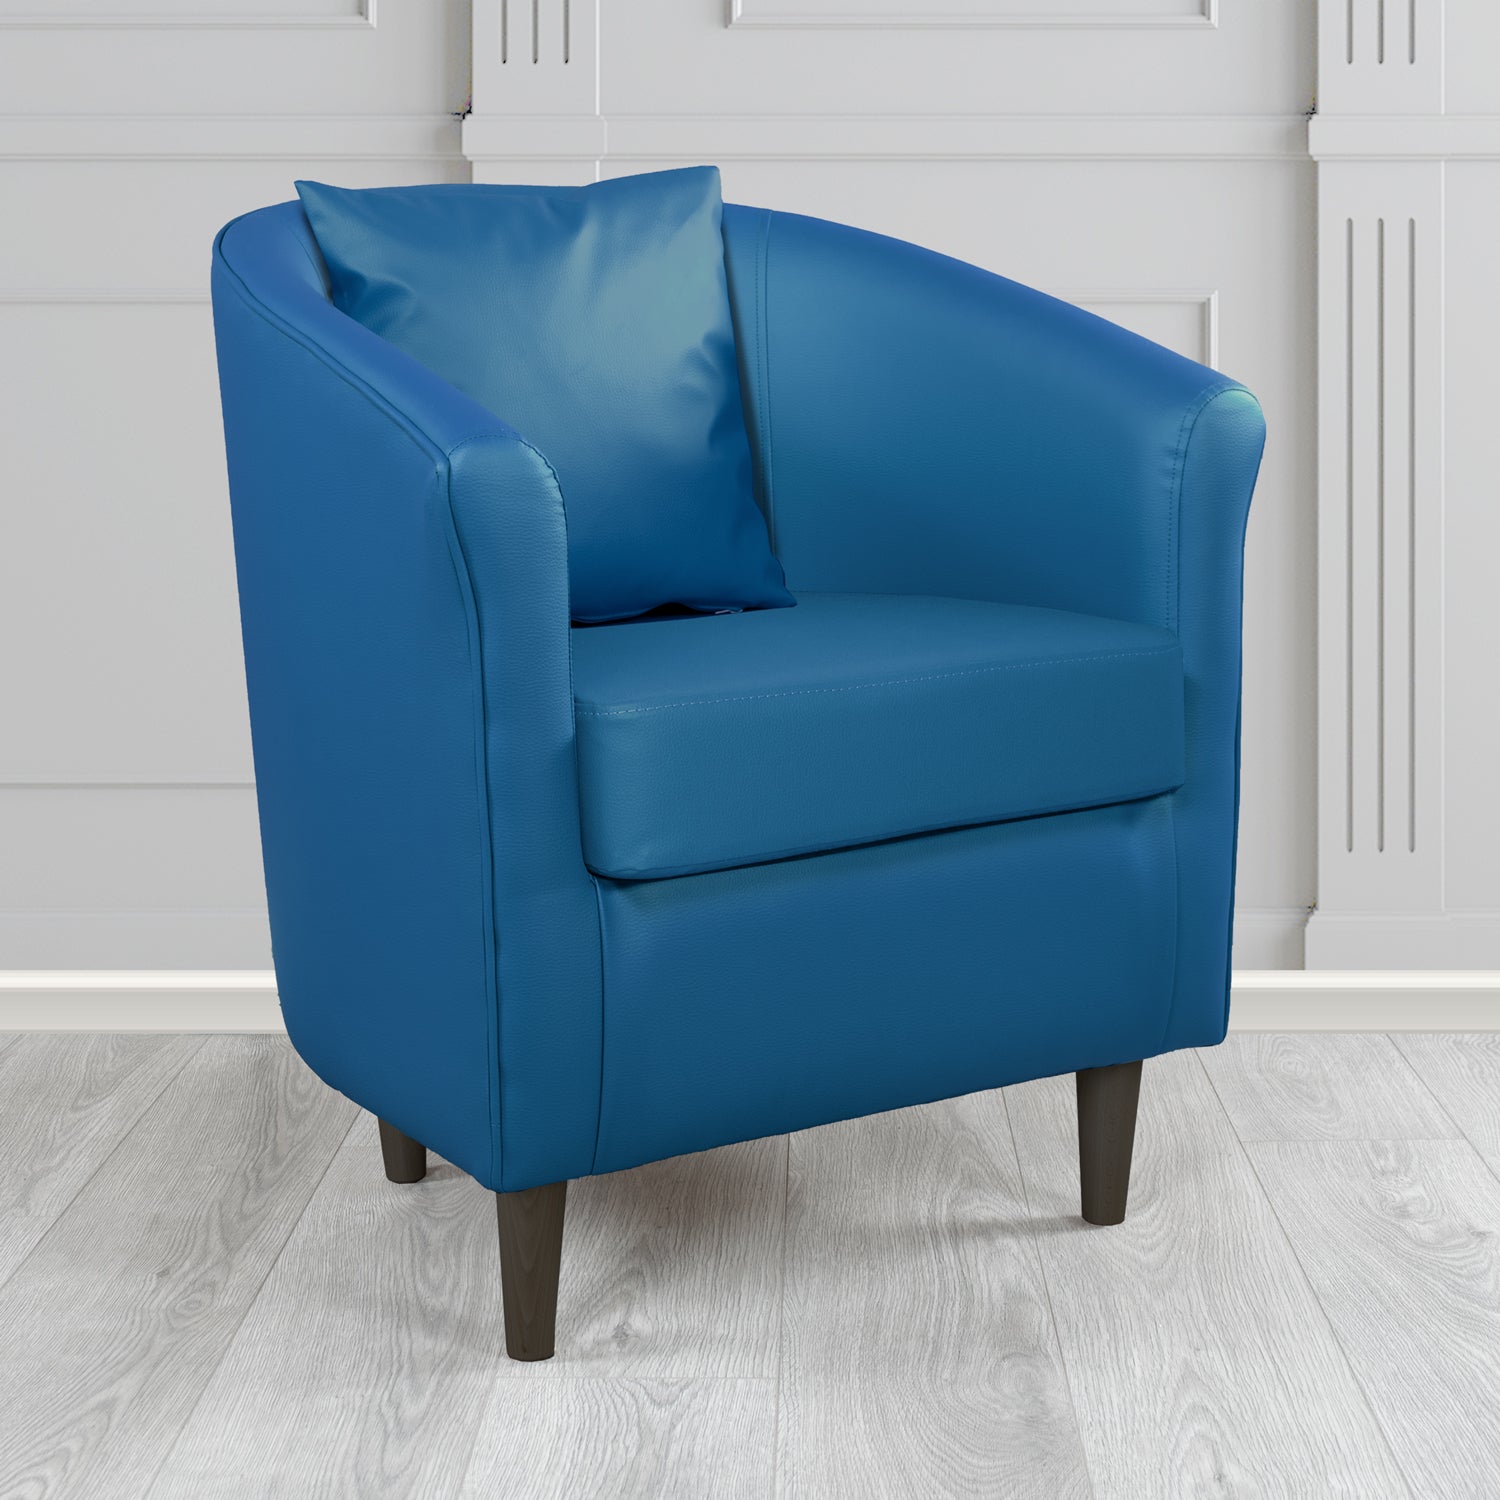 St Tropez Tub Chair with Scatter Cushion in Madrid Royal Faux Leather - The Tub Chair Shop